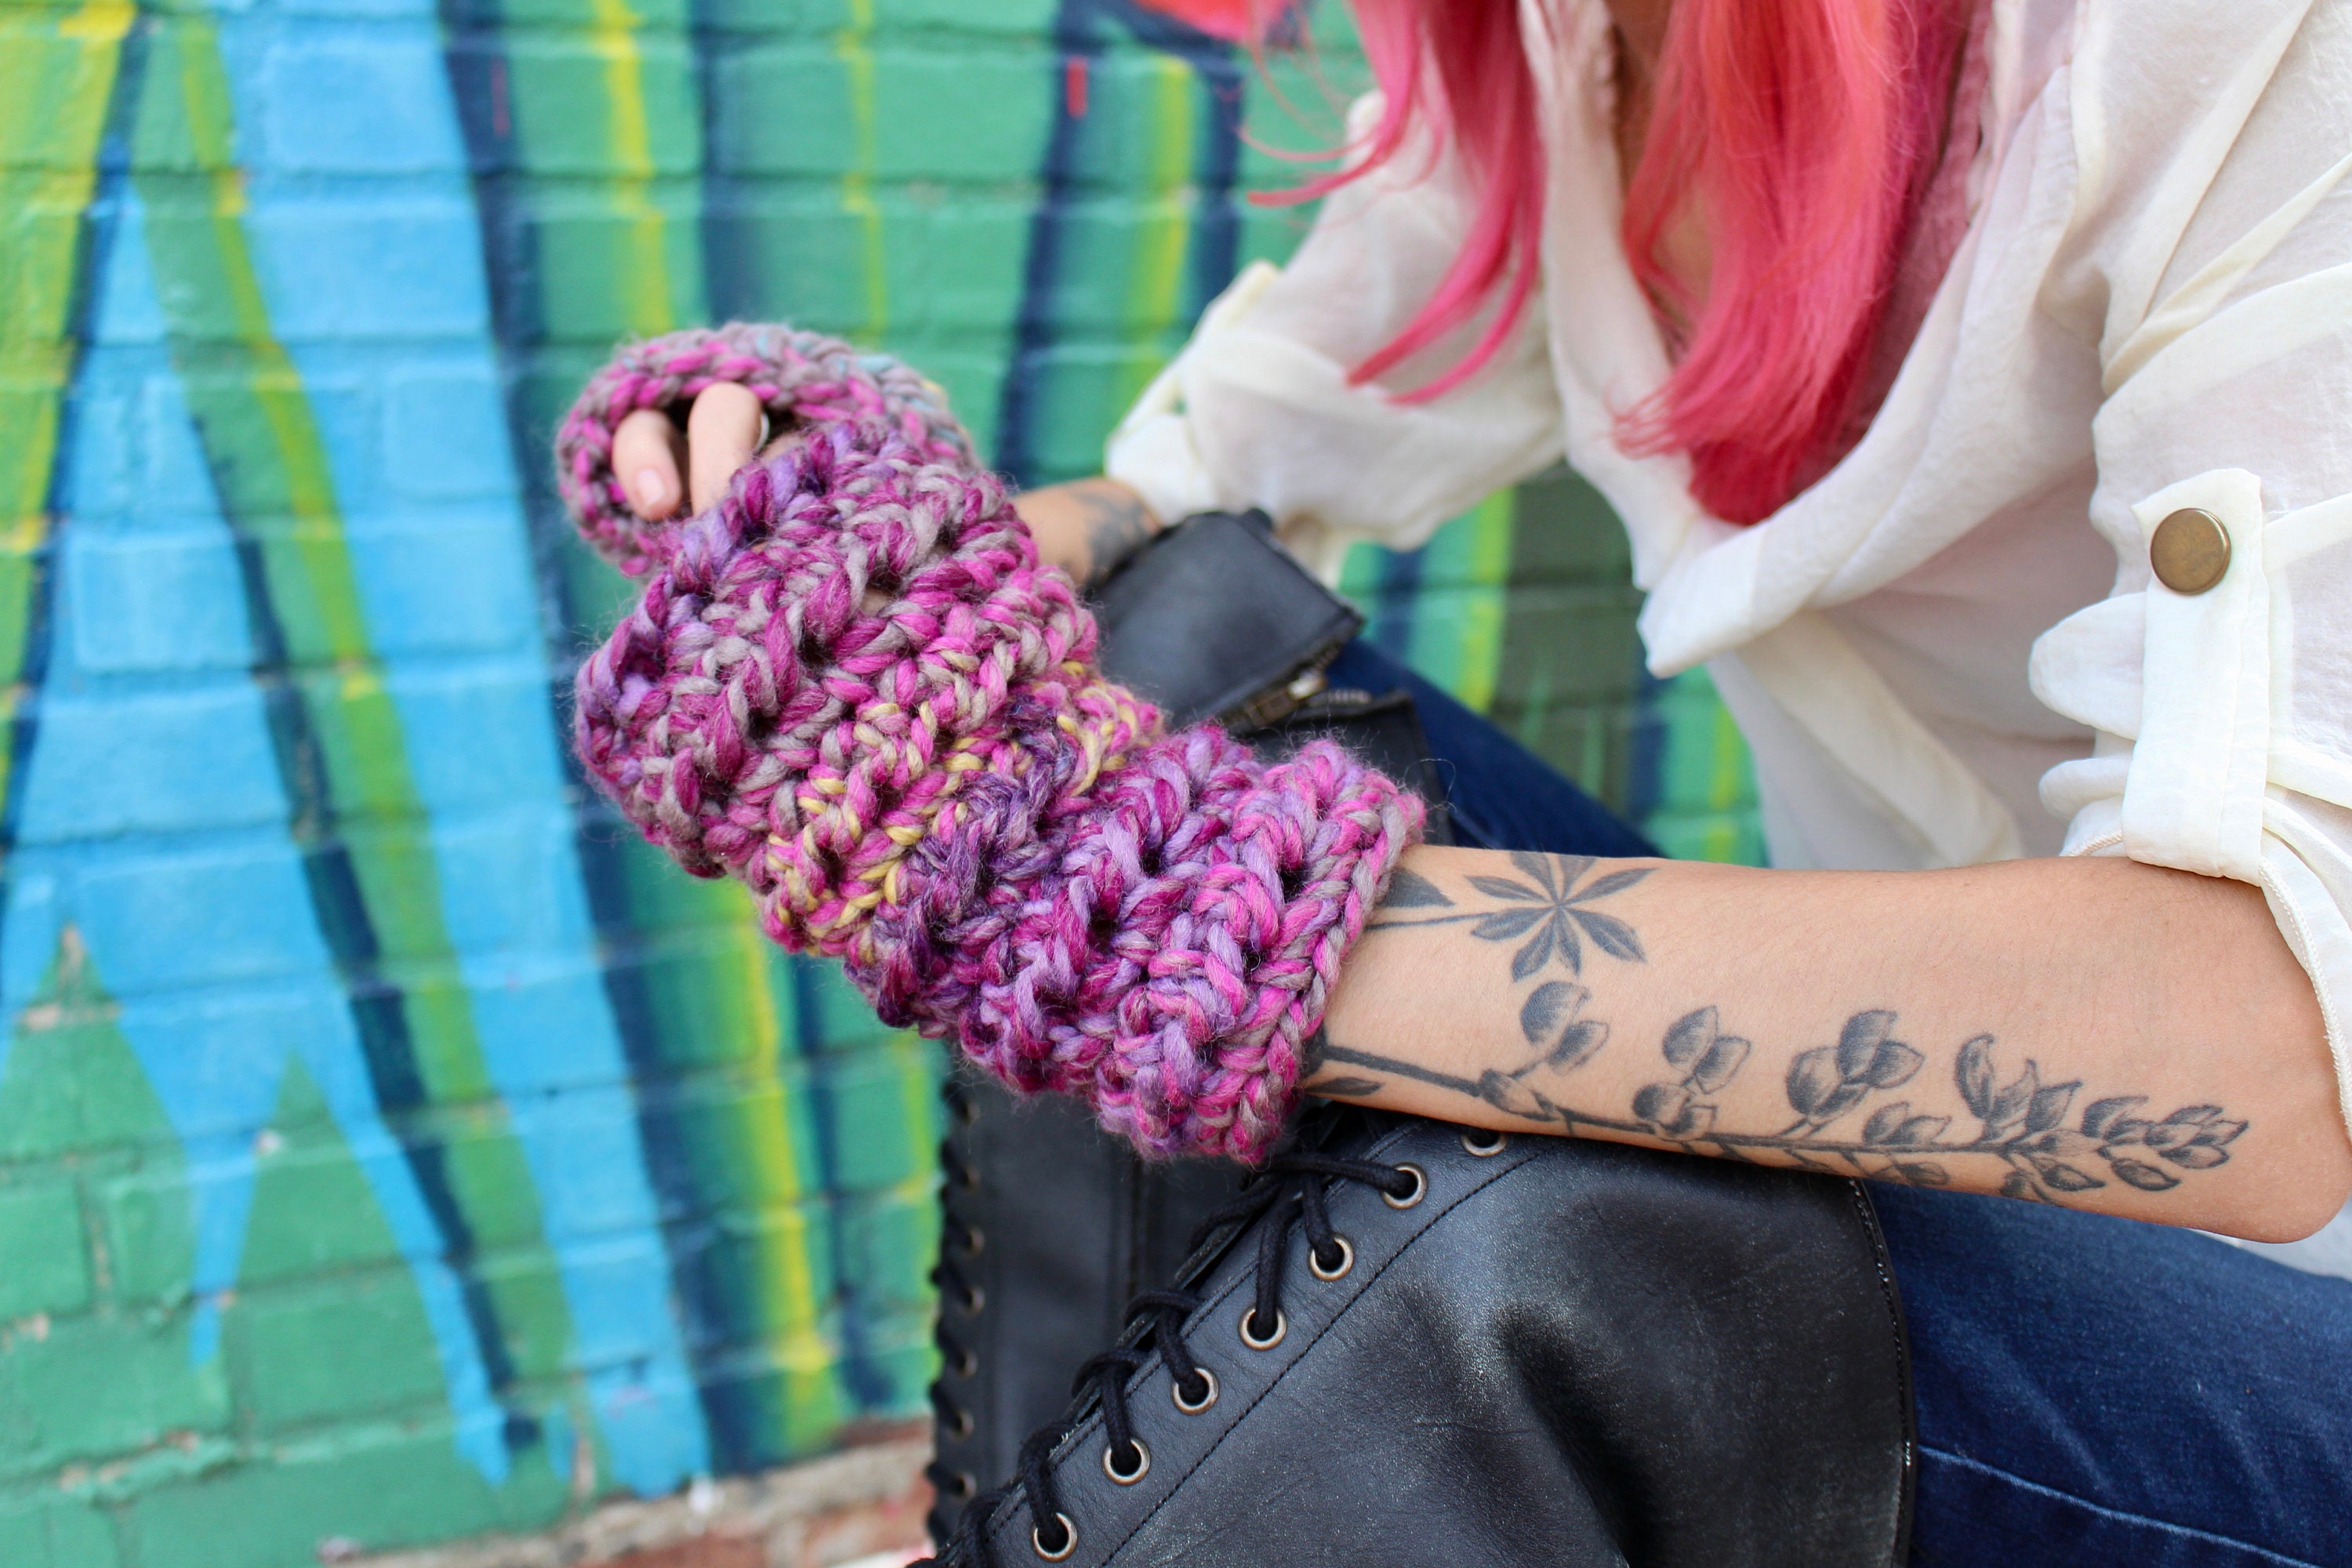 Ads-Free Chunky Knit Fingerless Gloves Pattern · Crazy Hands